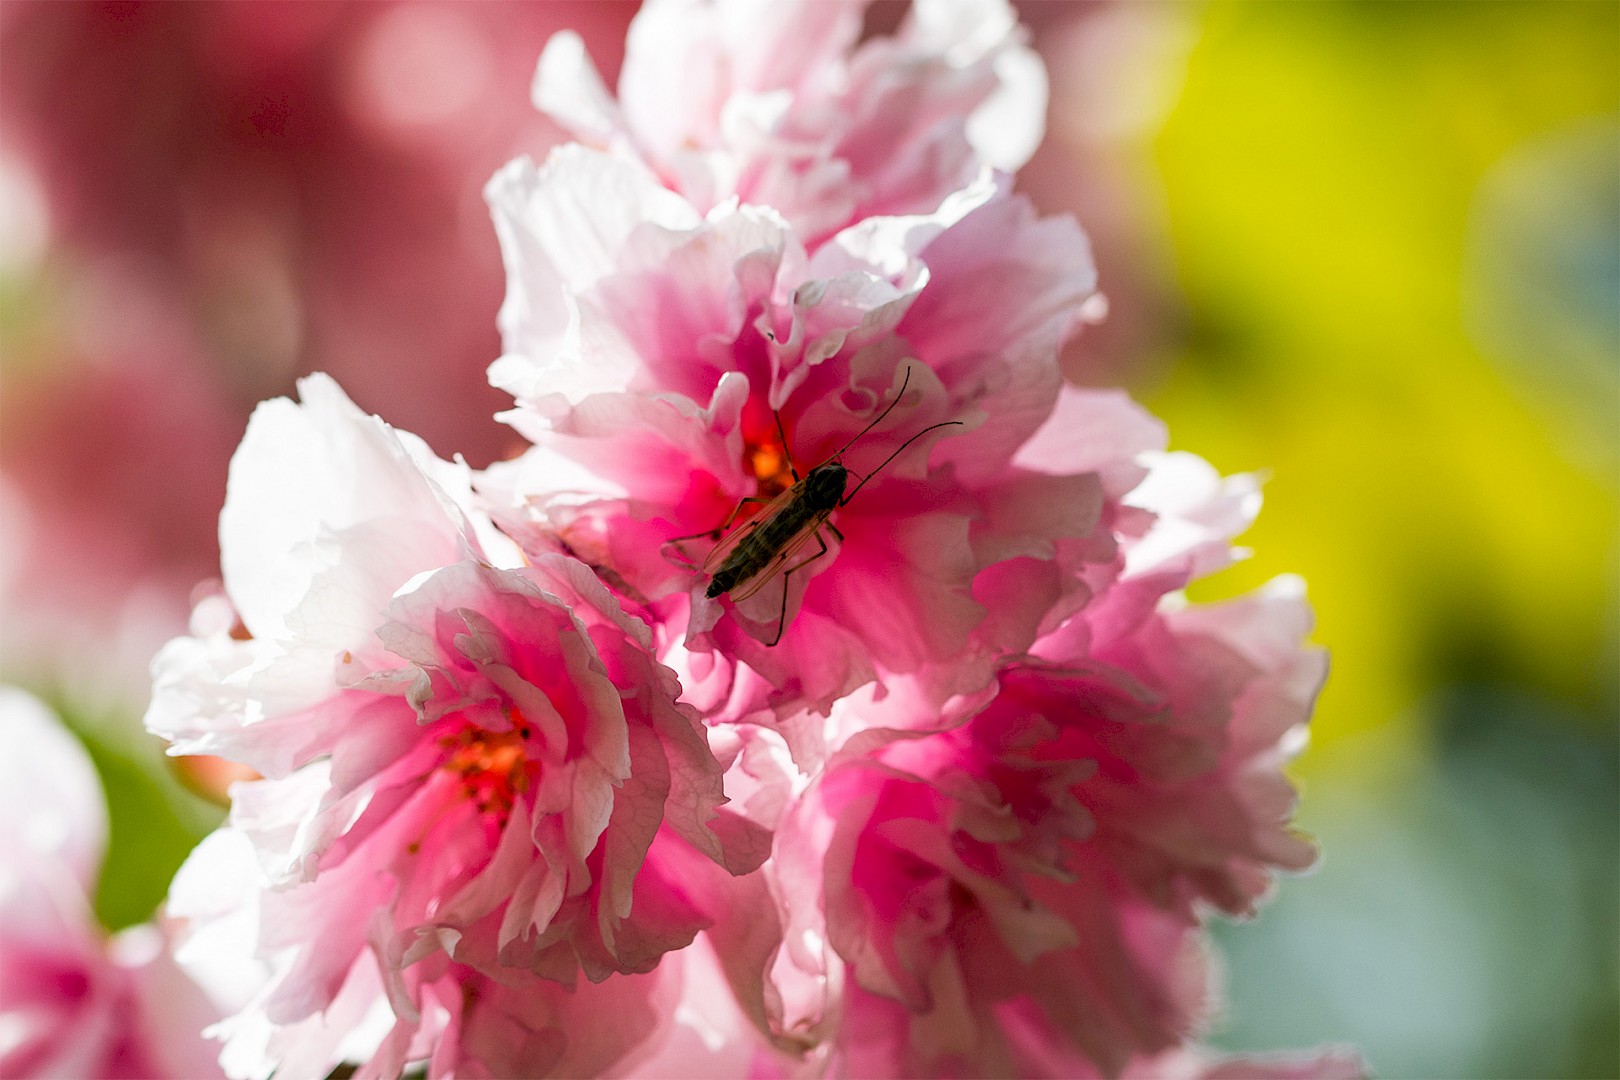 insect-on-petal.jpg